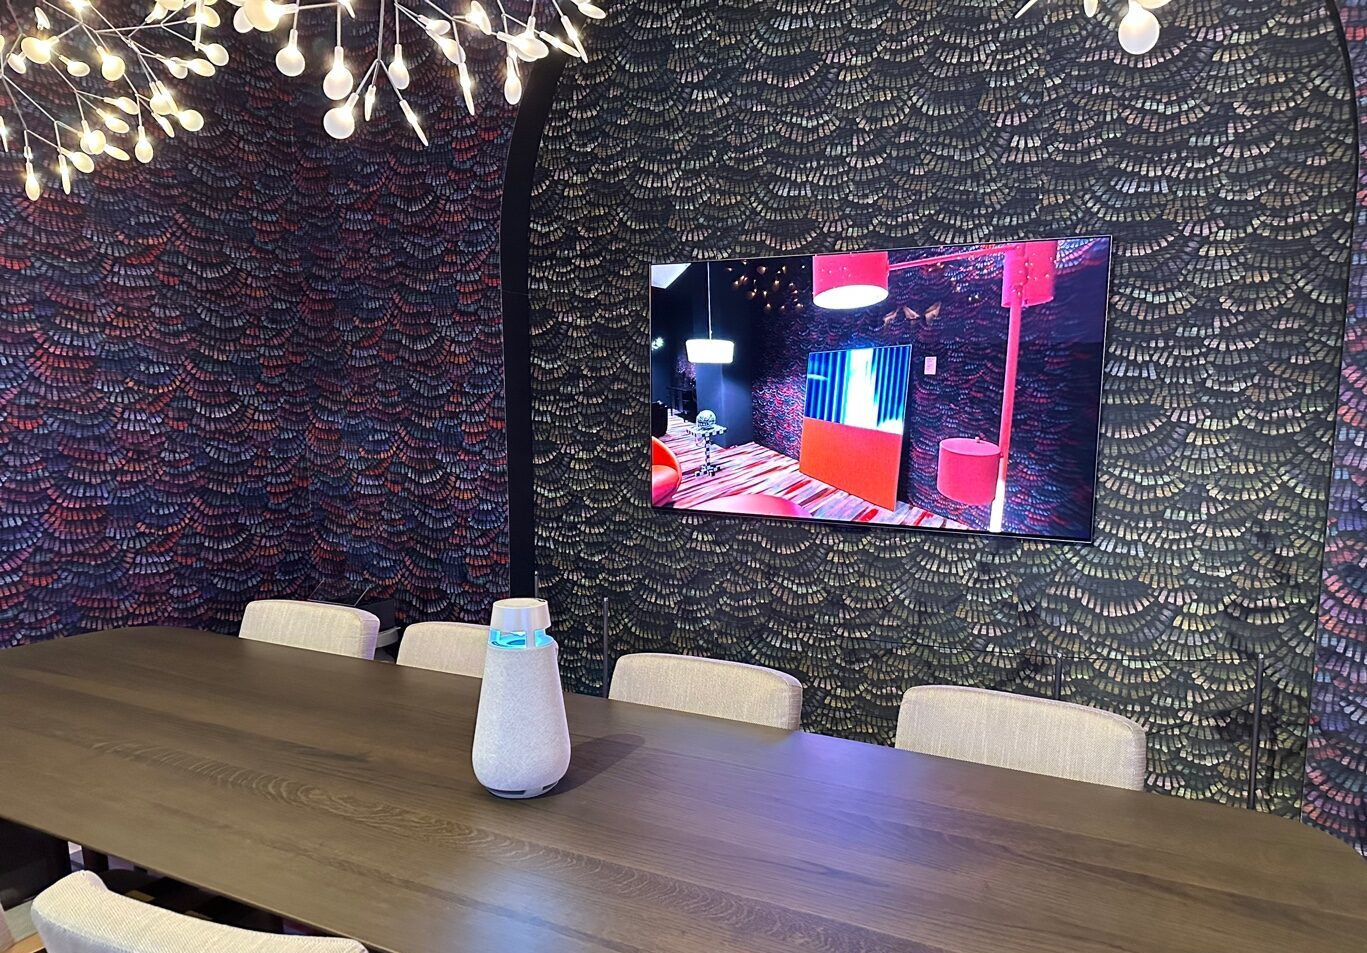 The 2023 LG Lifestyle screen mounted on the wall of a CES 2023 showroom with LG XBOOM speaker on the table in front